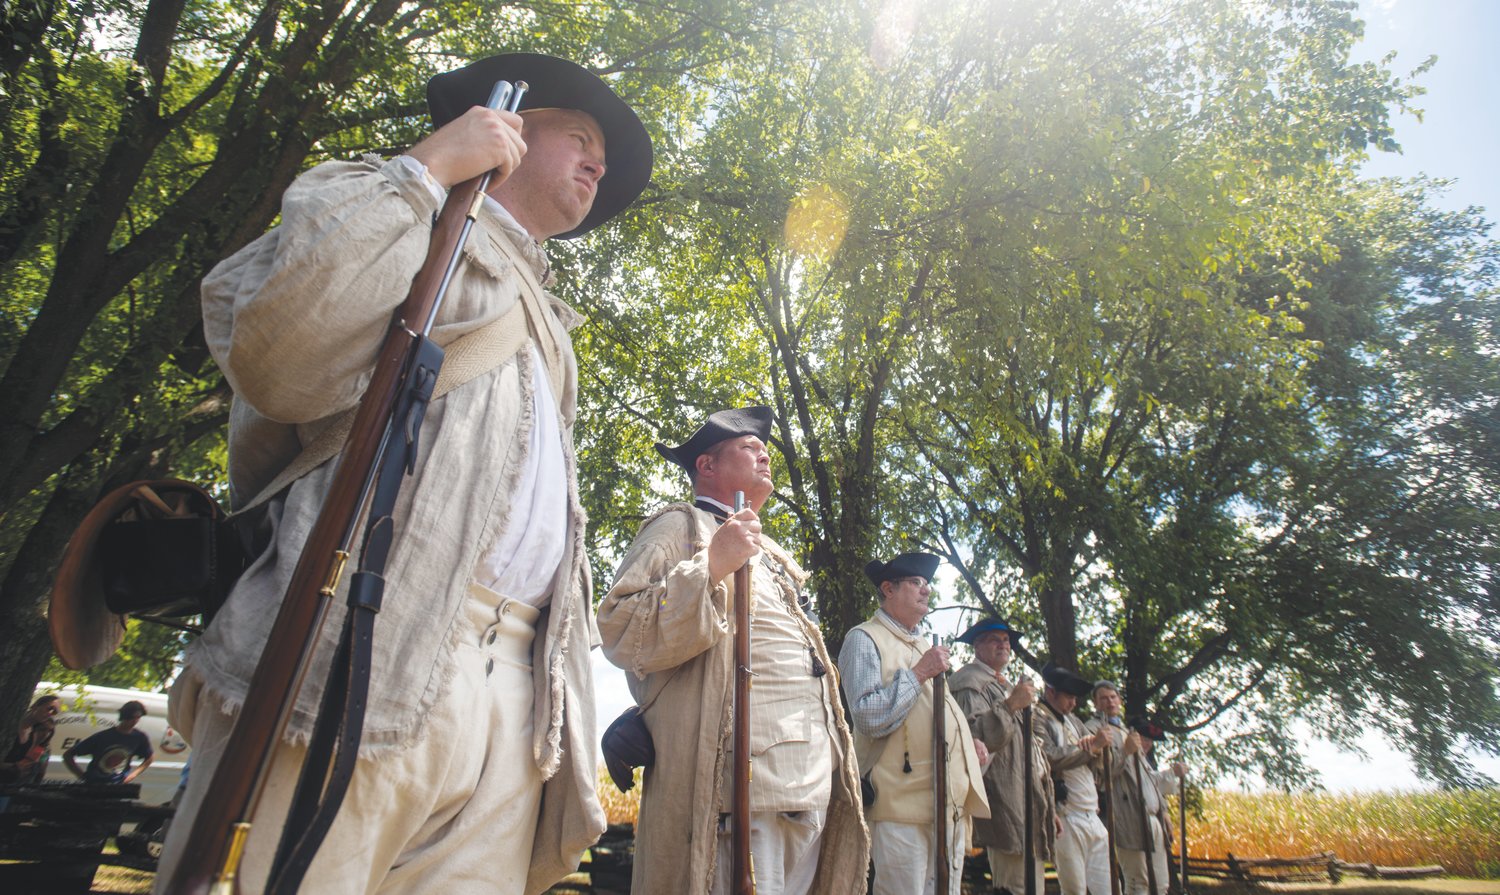 AJ Drake, left, stands in formation before he and other reenactors fire duplicates of Revolutionary War-era firearms. Last Saturday saw a retelling of the 1781 battle at the Alston House, also known as the House in the Horseshoe, in Sanford.